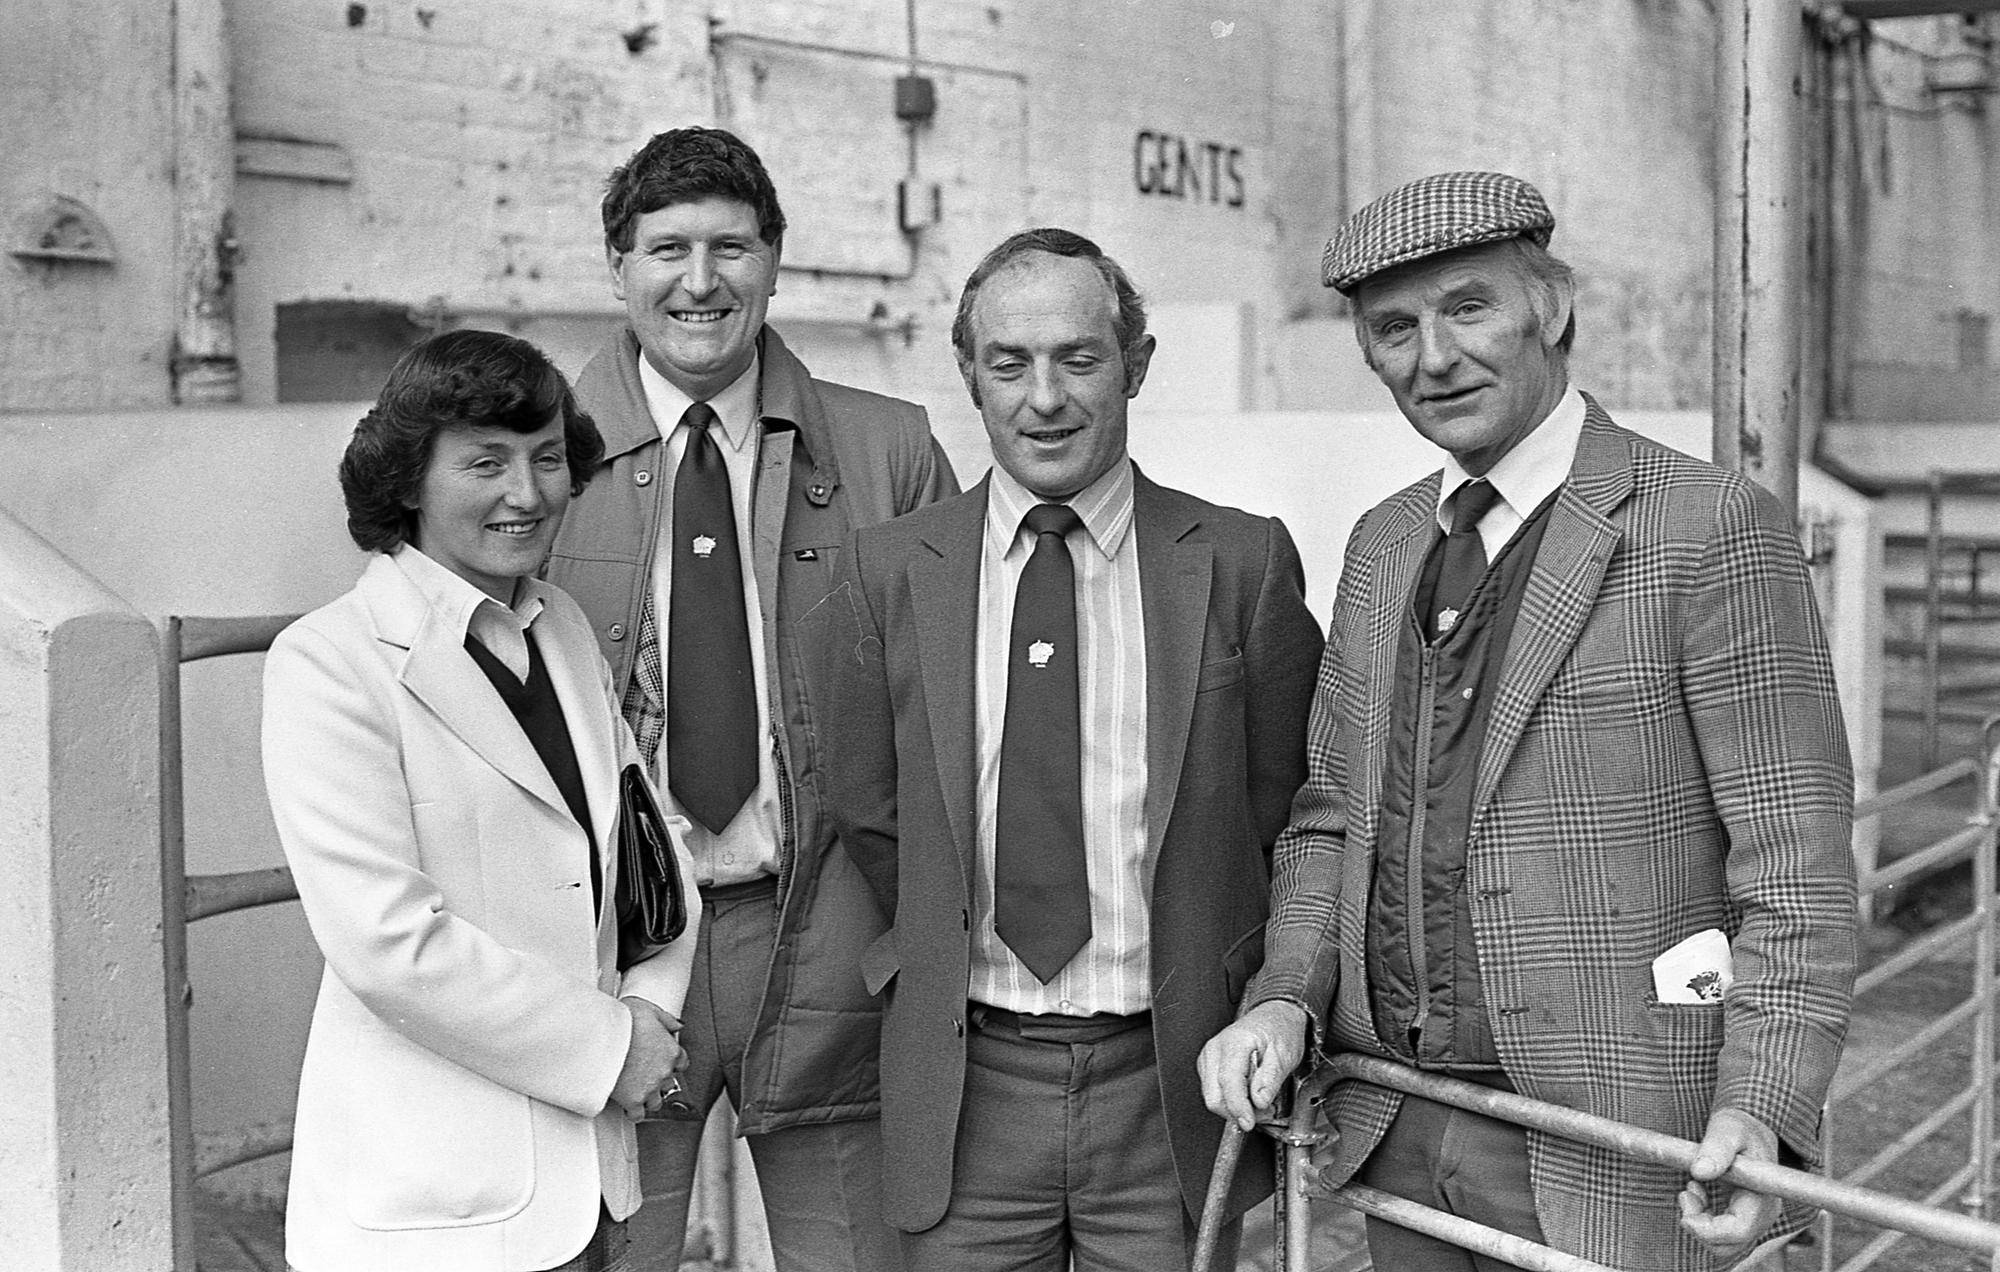 Texel pedigree sheep were in brisk demand at the breed show and sale which was held at Automart, Portadown, in October 1981. Pictured is the judge Mr Patrick Niland, third left, from Galway with his wife, auctioneer Tom Clarke, and Robert Mulligan, NI Texel Club chairman. Picture: Farming Life archives/Darryl Armitage